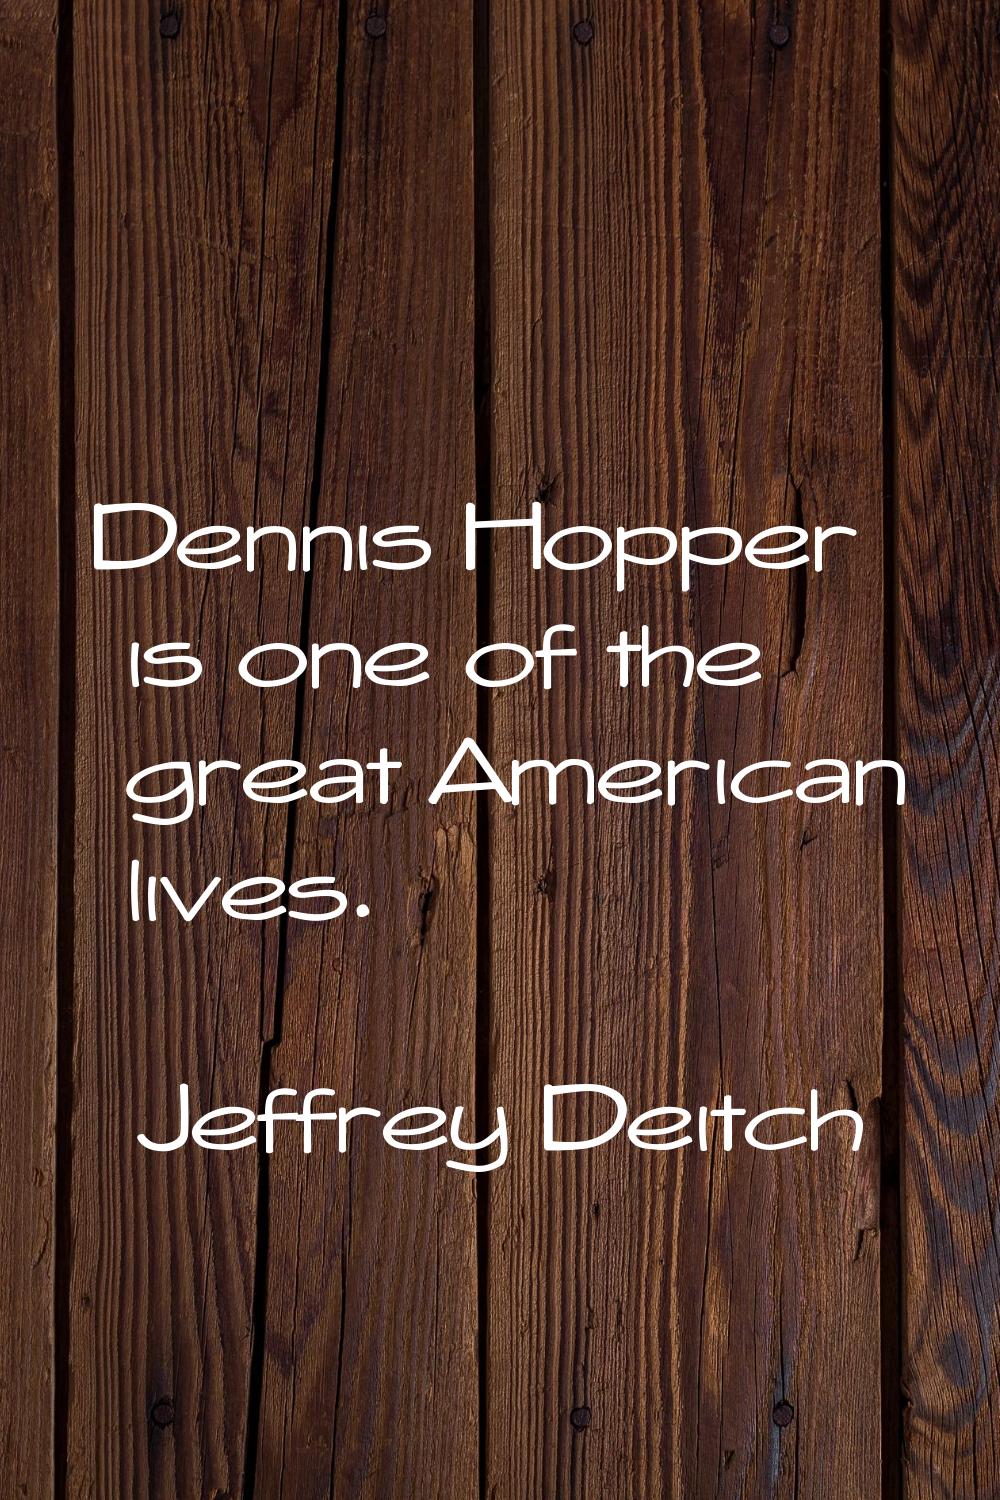 Dennis Hopper is one of the great American lives.